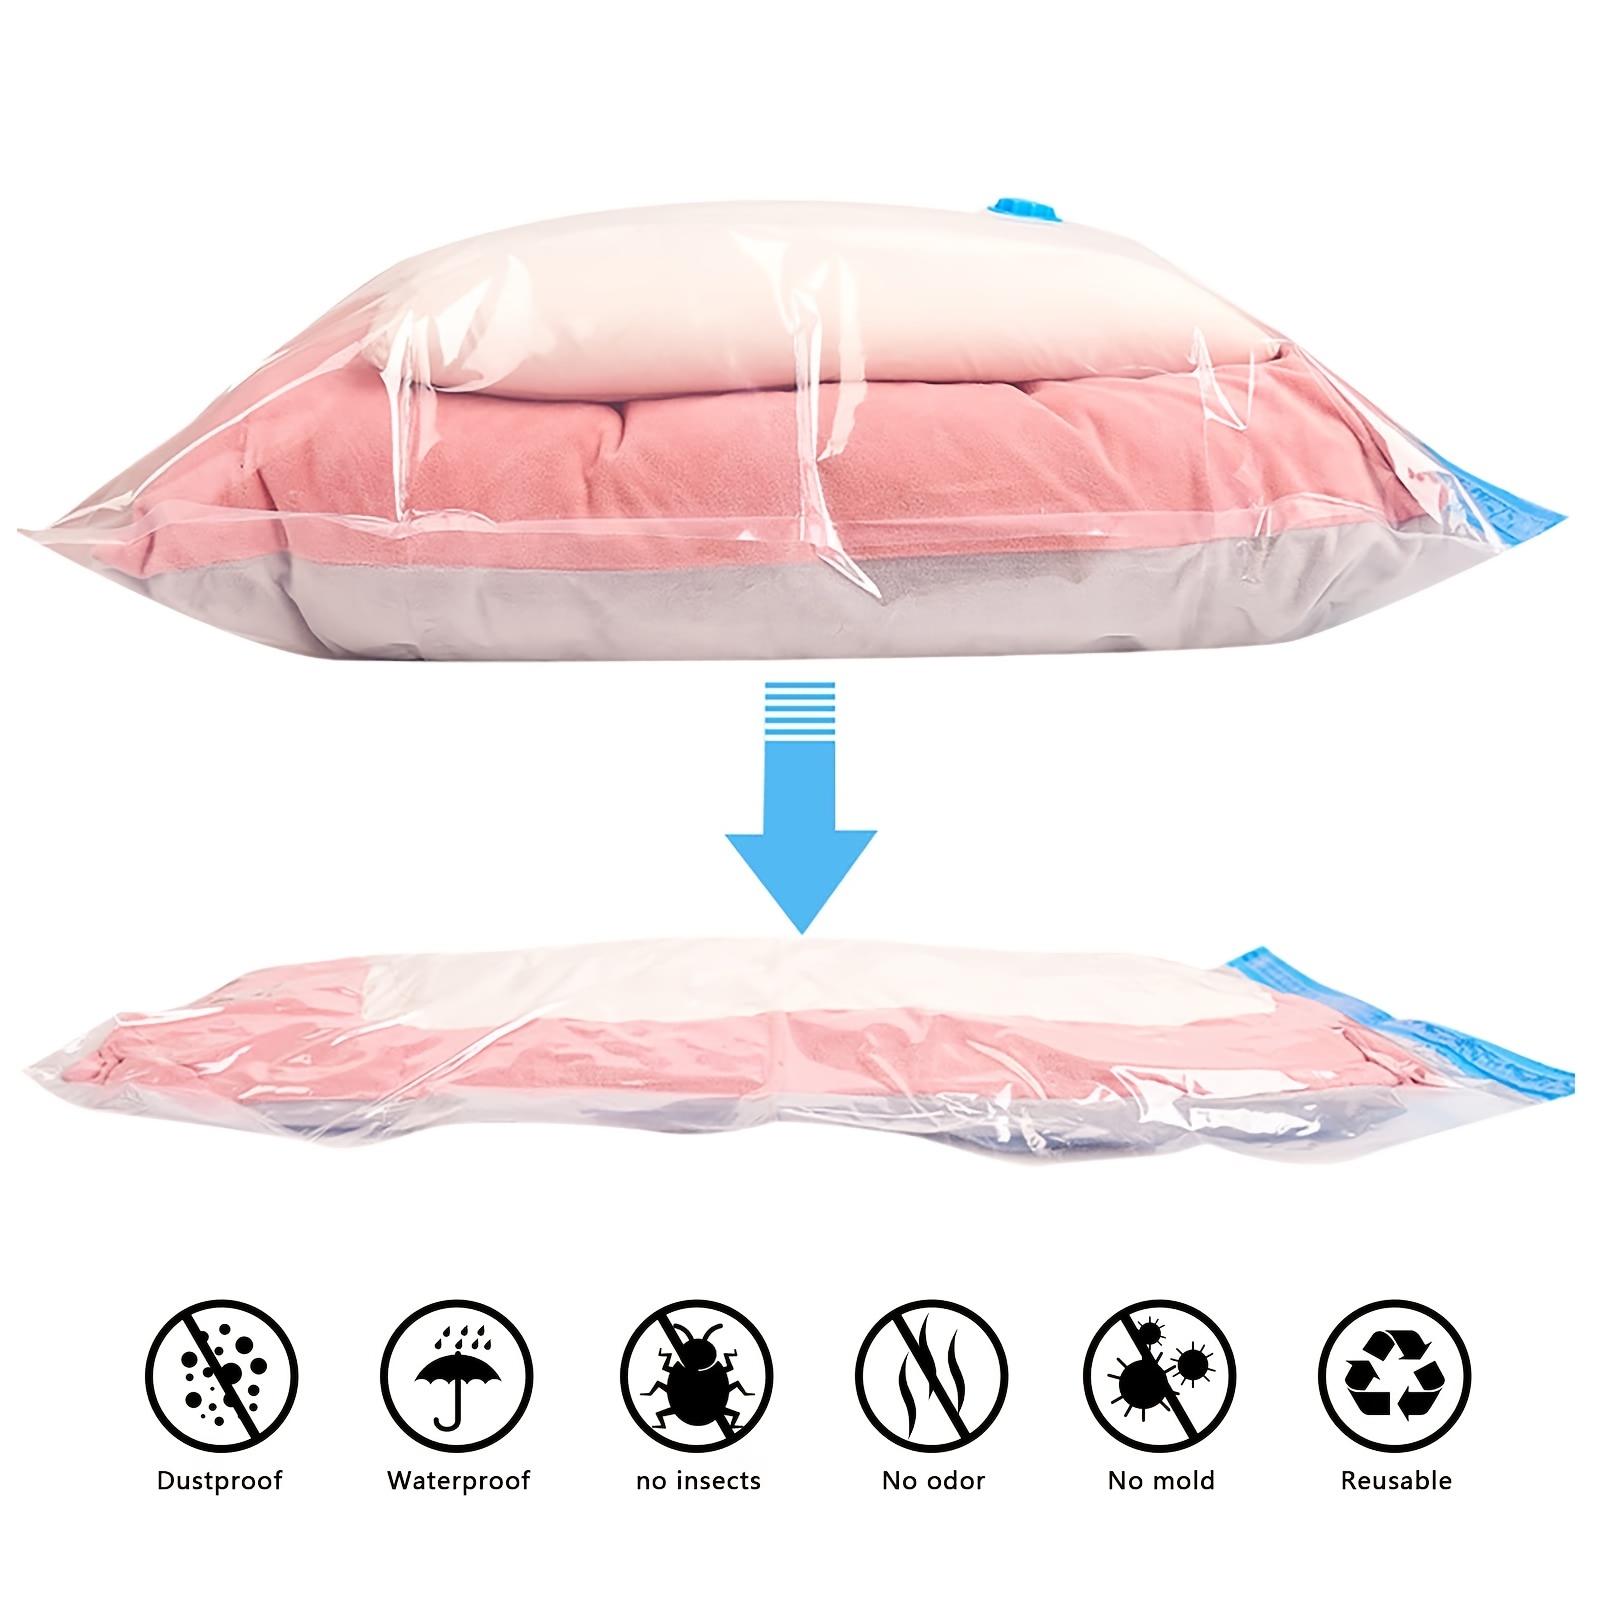 Rubrum Rosa Vacuum Storage Bags, Space Saver Compression Bags with Travel Hand Pump Travel Vacuum Storage Bags for Clothes Comforters Blankets Pillows with Jumbo